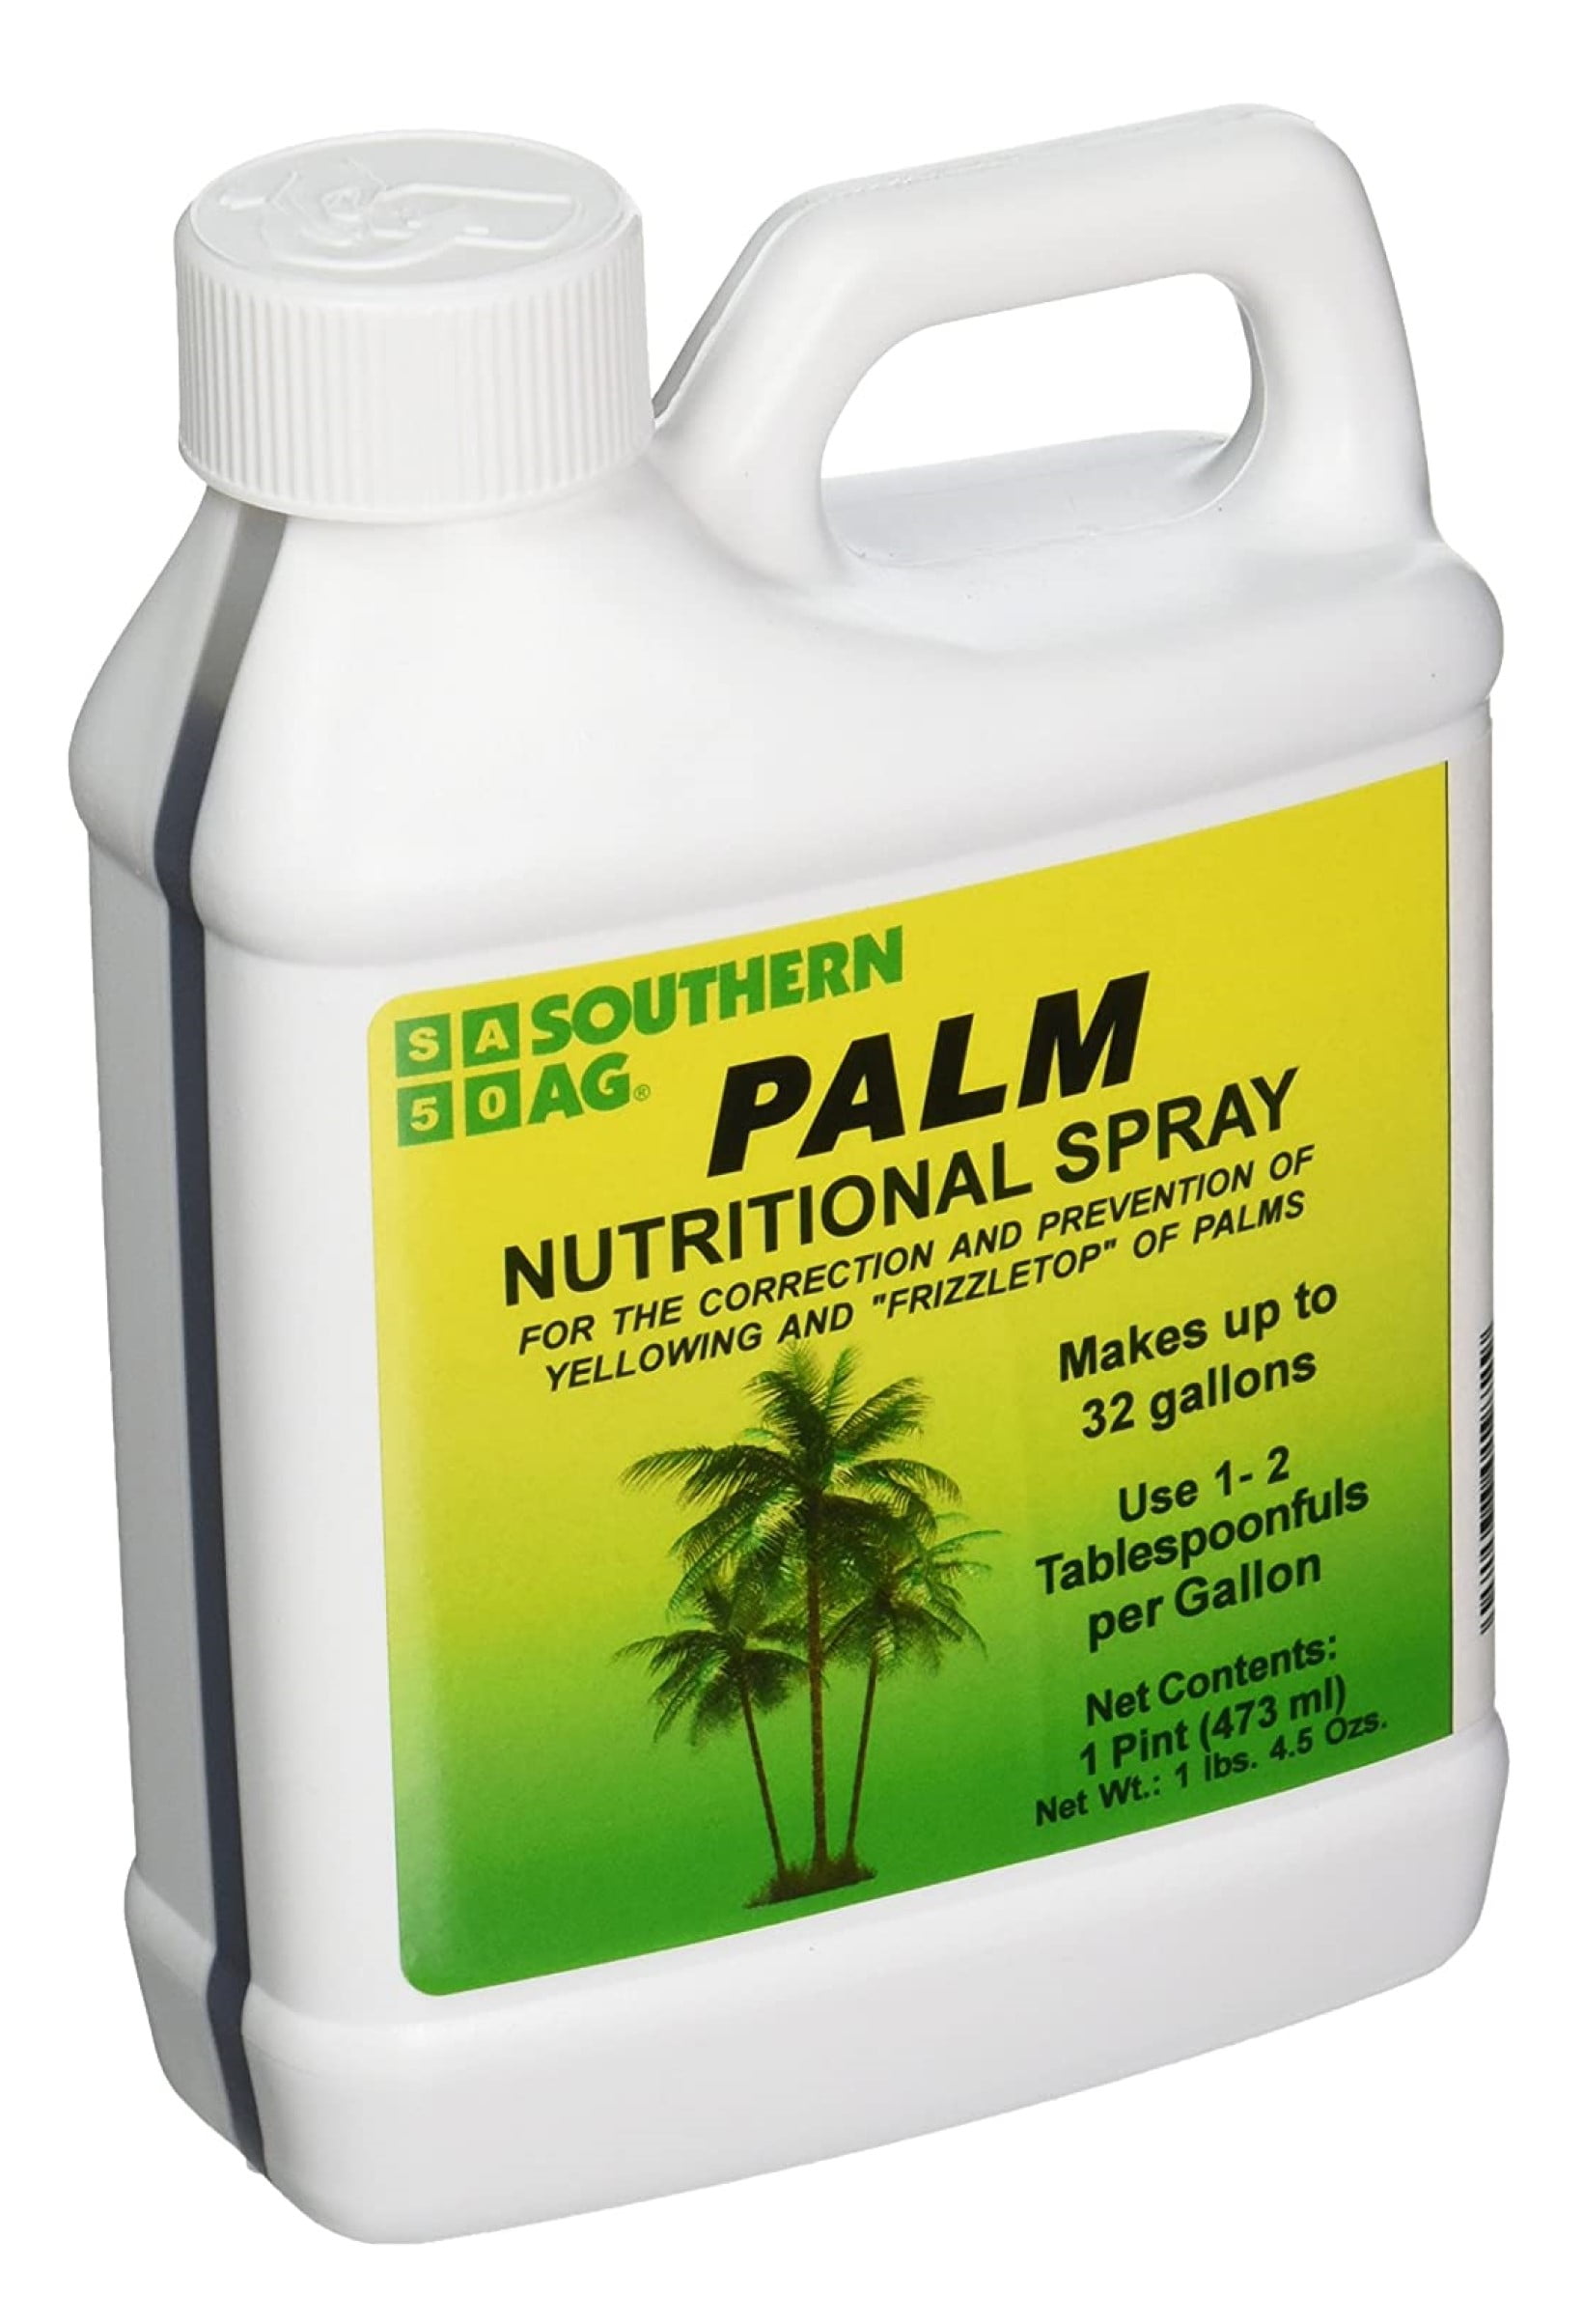 Glyphosate-Tested Palm Shortening - 33 lbs. (limit of 1) – Healthy